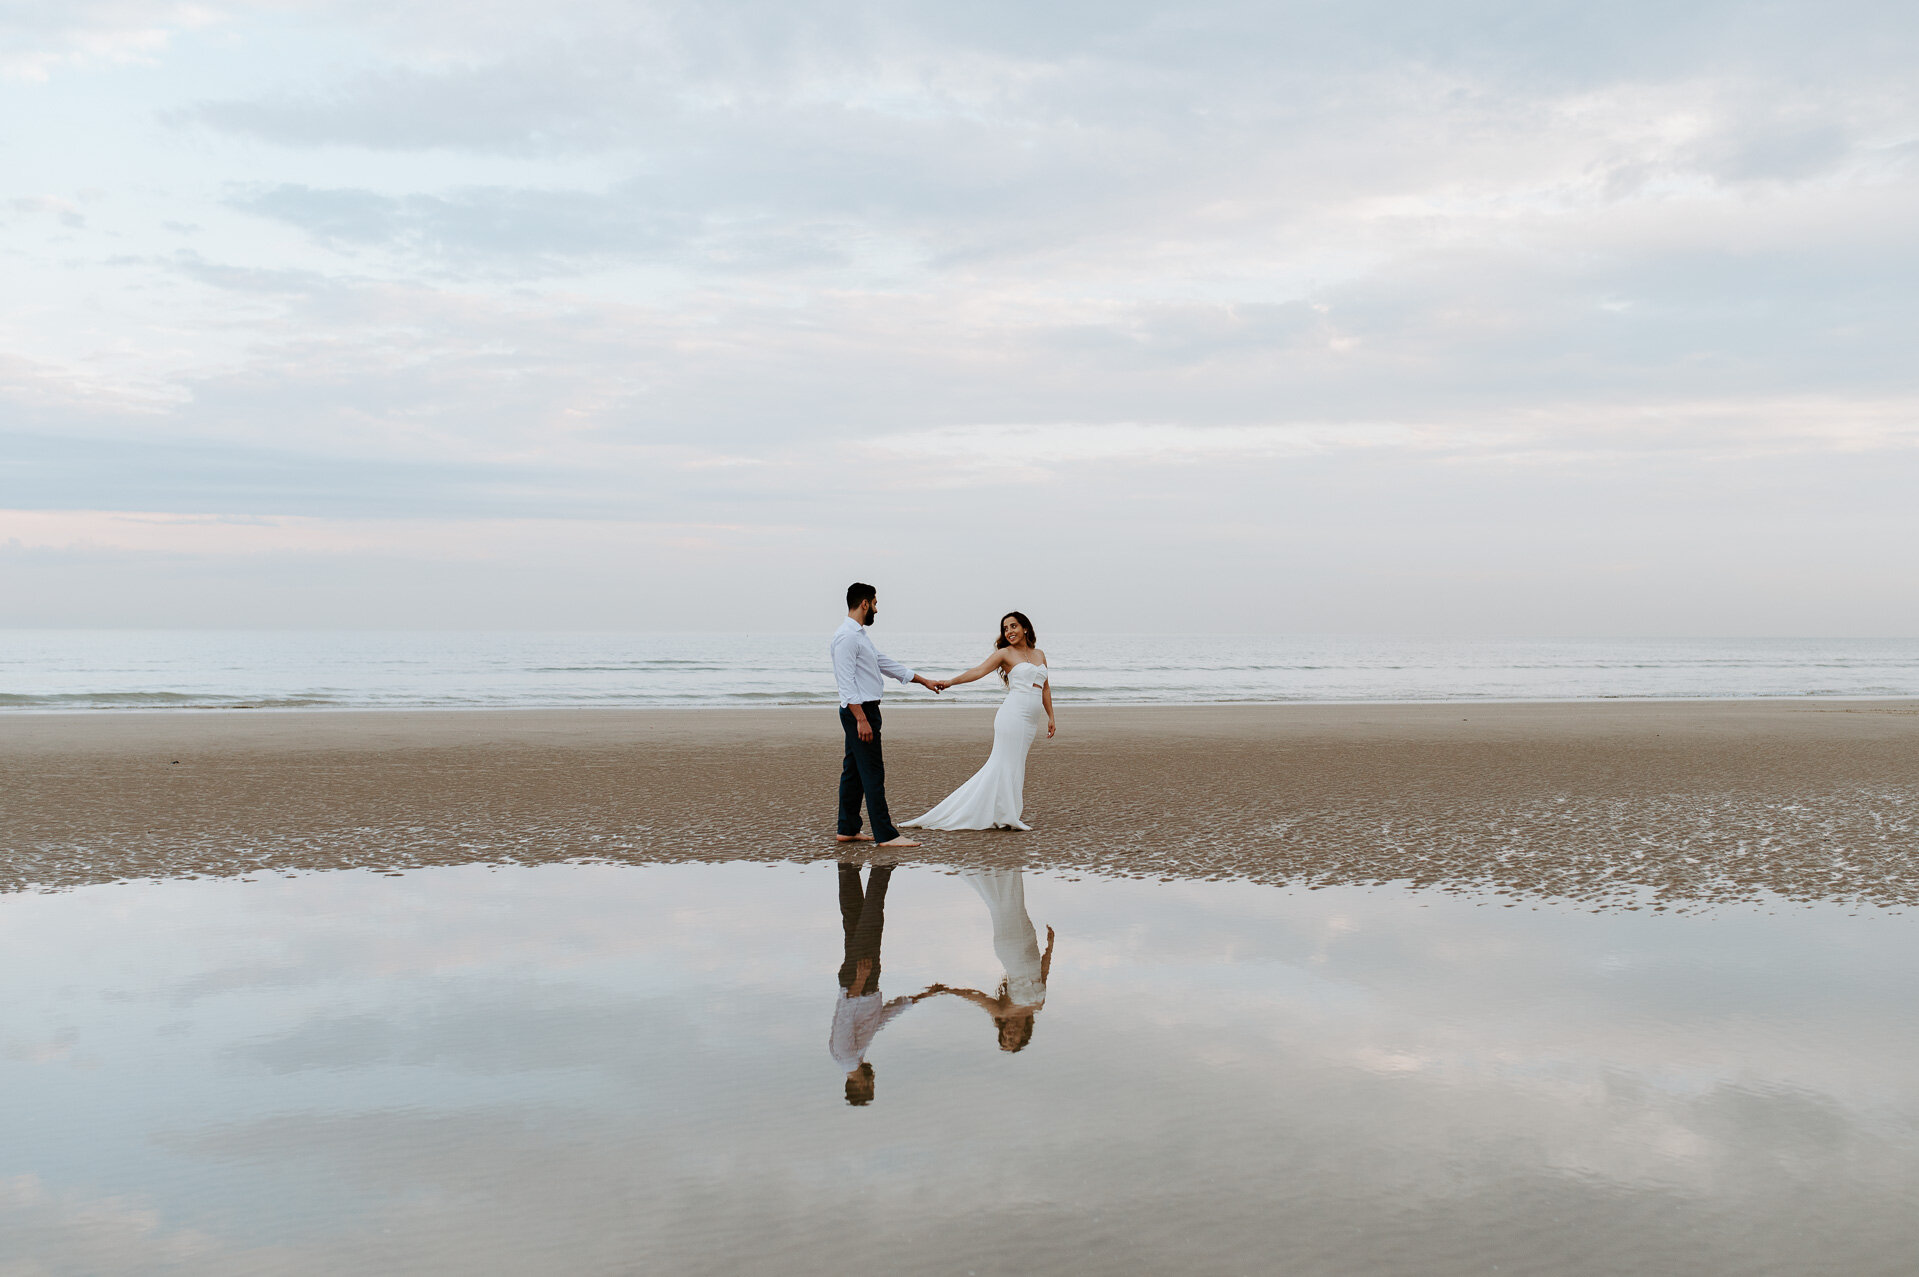 Demiana and Goergeuos - Camber Sands Golden Hour Beach Shoot - Laura Williams Photography-24.jpg